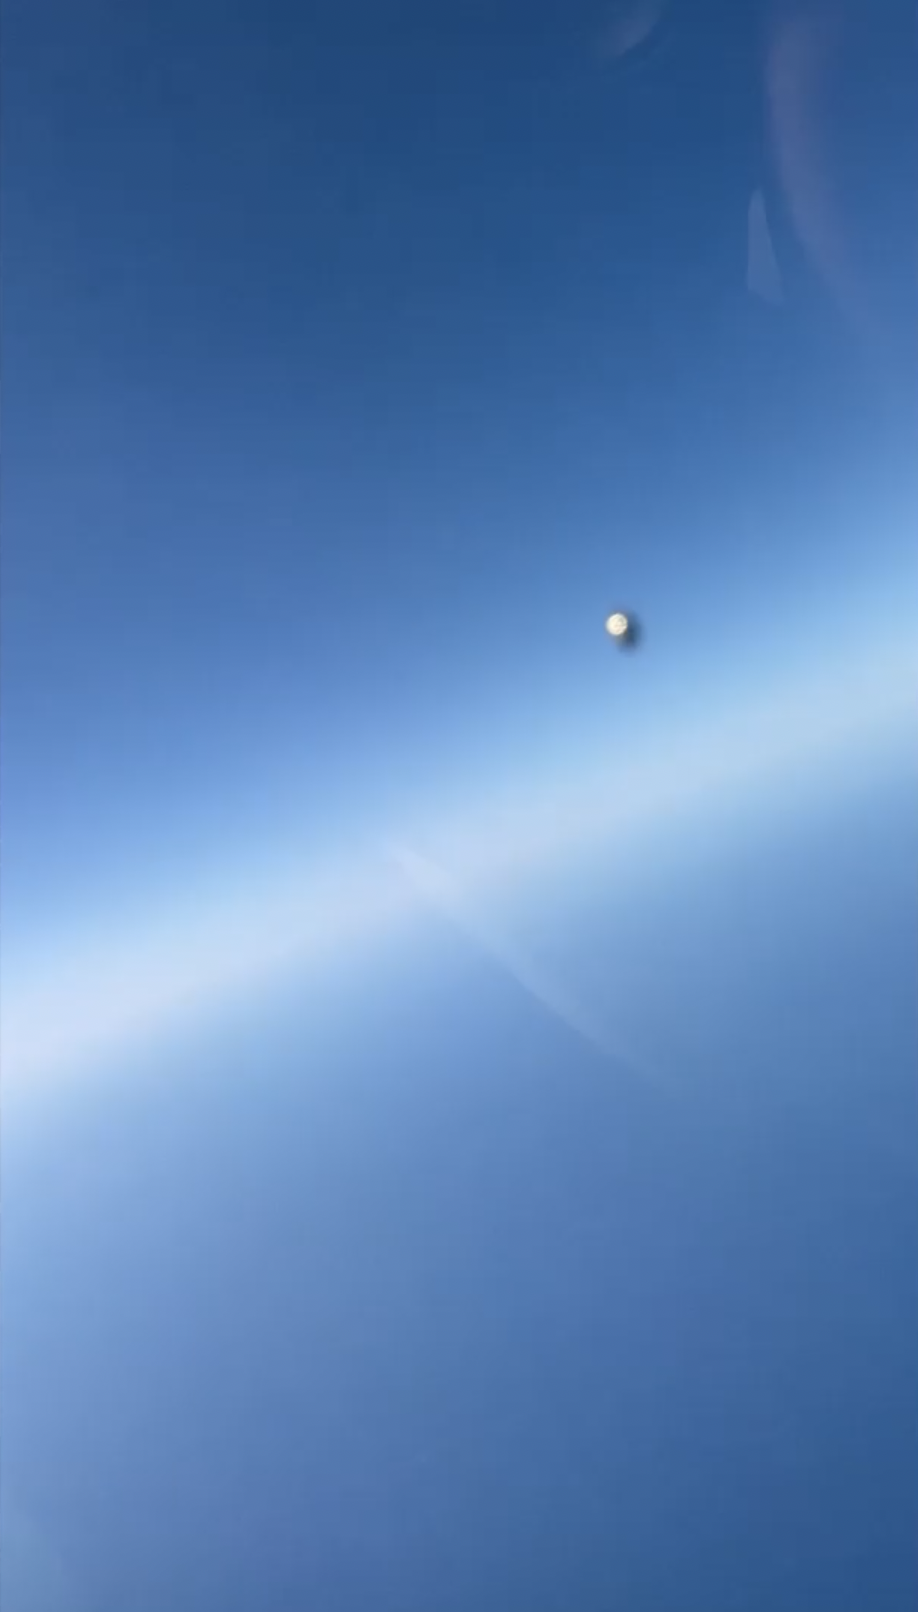 A spherical UFO zoomed past a fighter jet